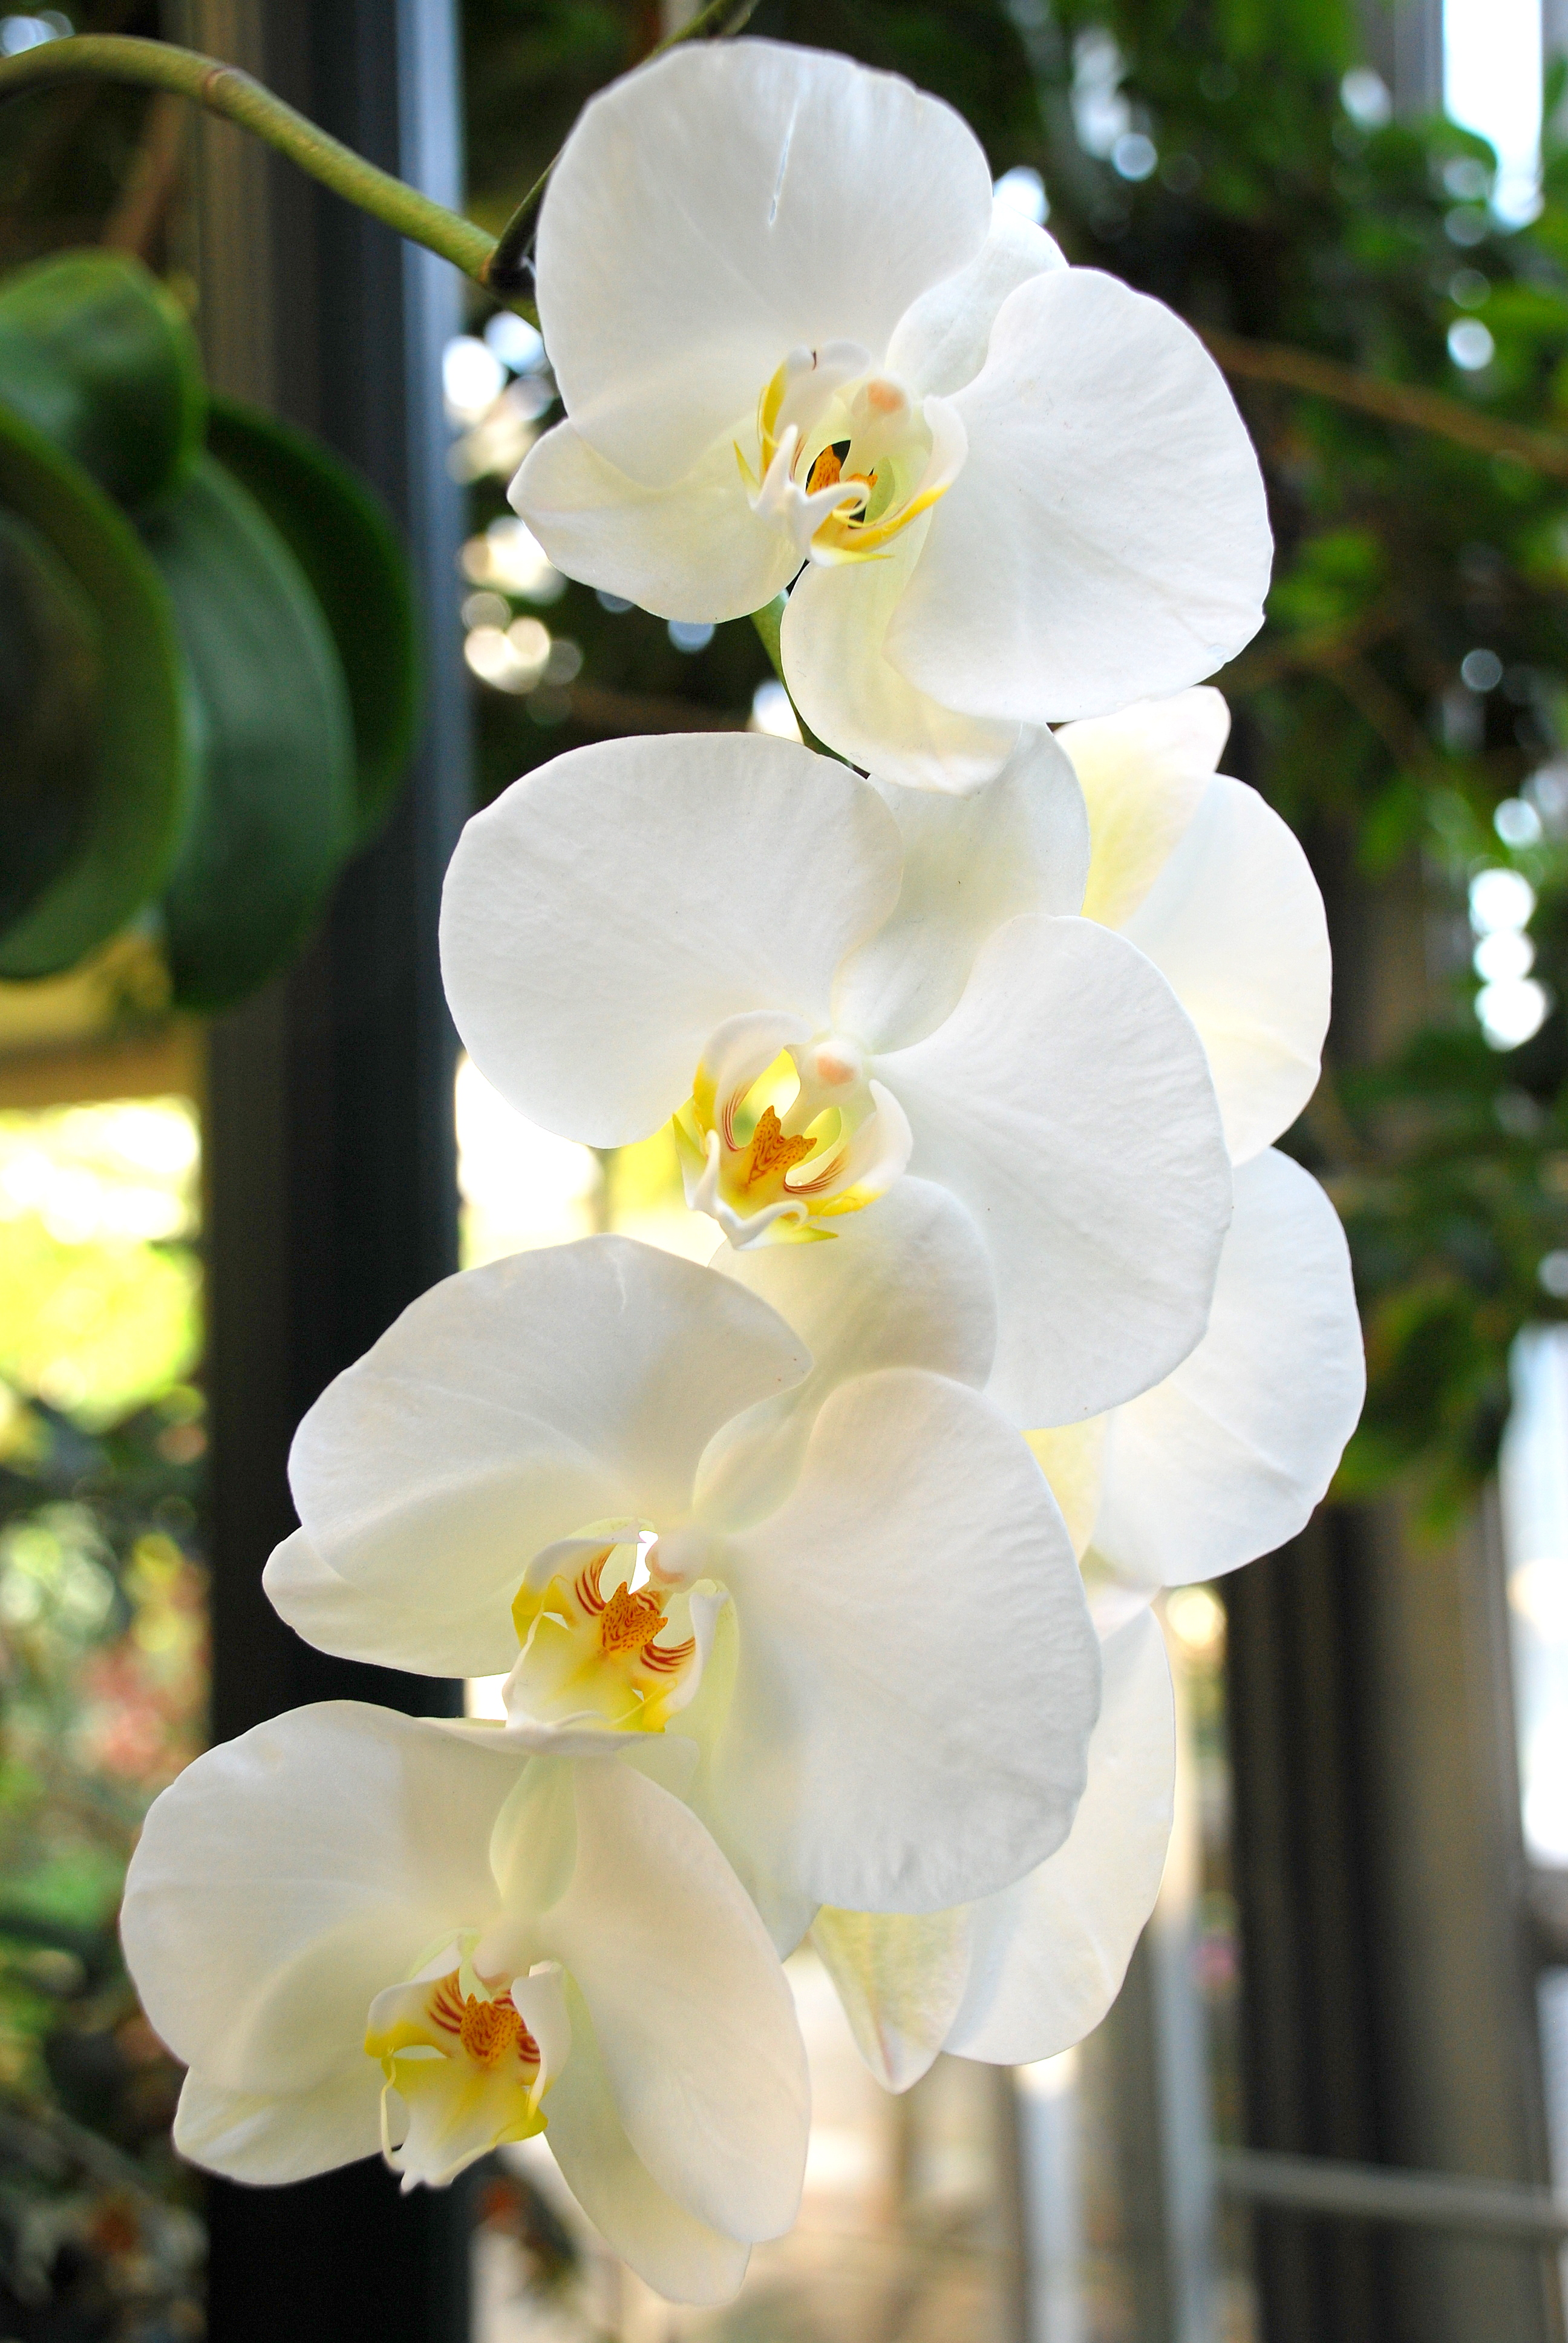 File:White Orchids.JPG - Wikimedia Commons